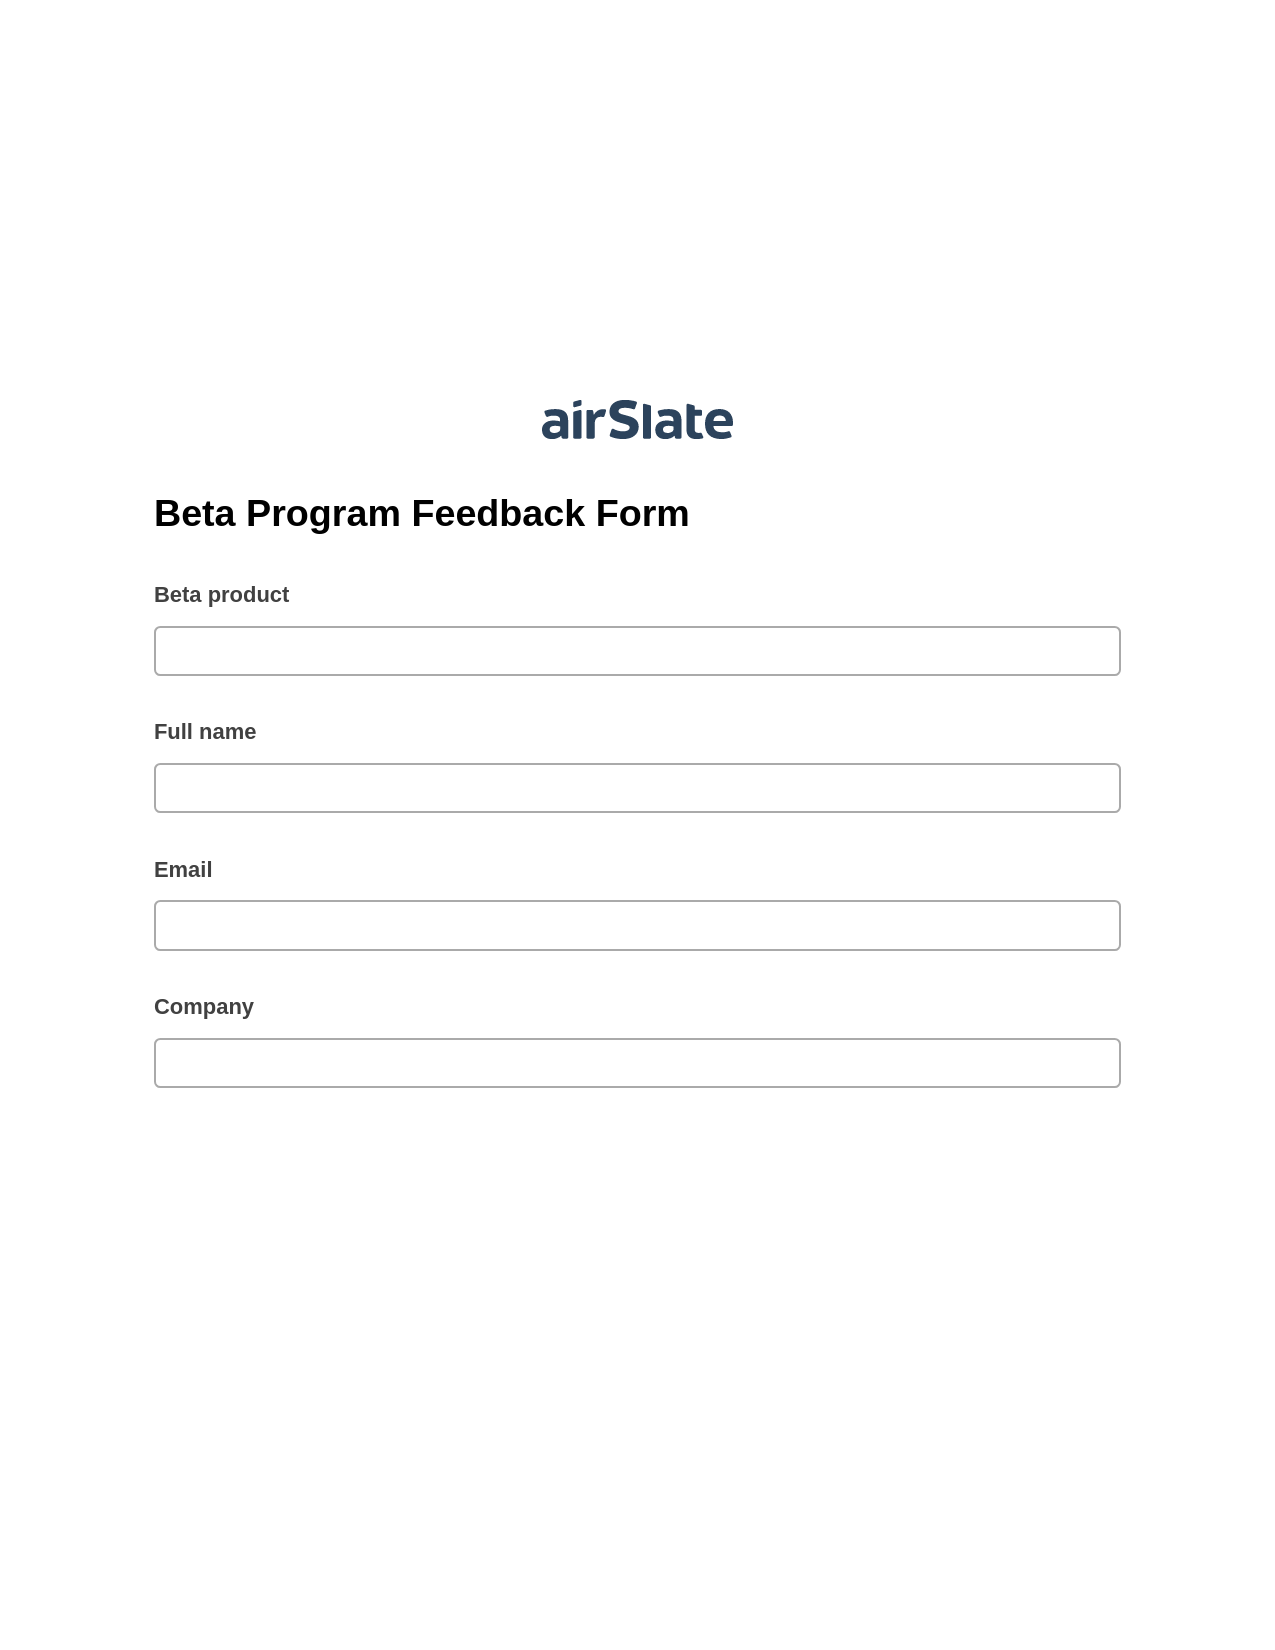 Beta Program Feedback Form Pre-fill from Salesforce Record Bot, Slack Notification Bot, Export to Formstack Documents Bot